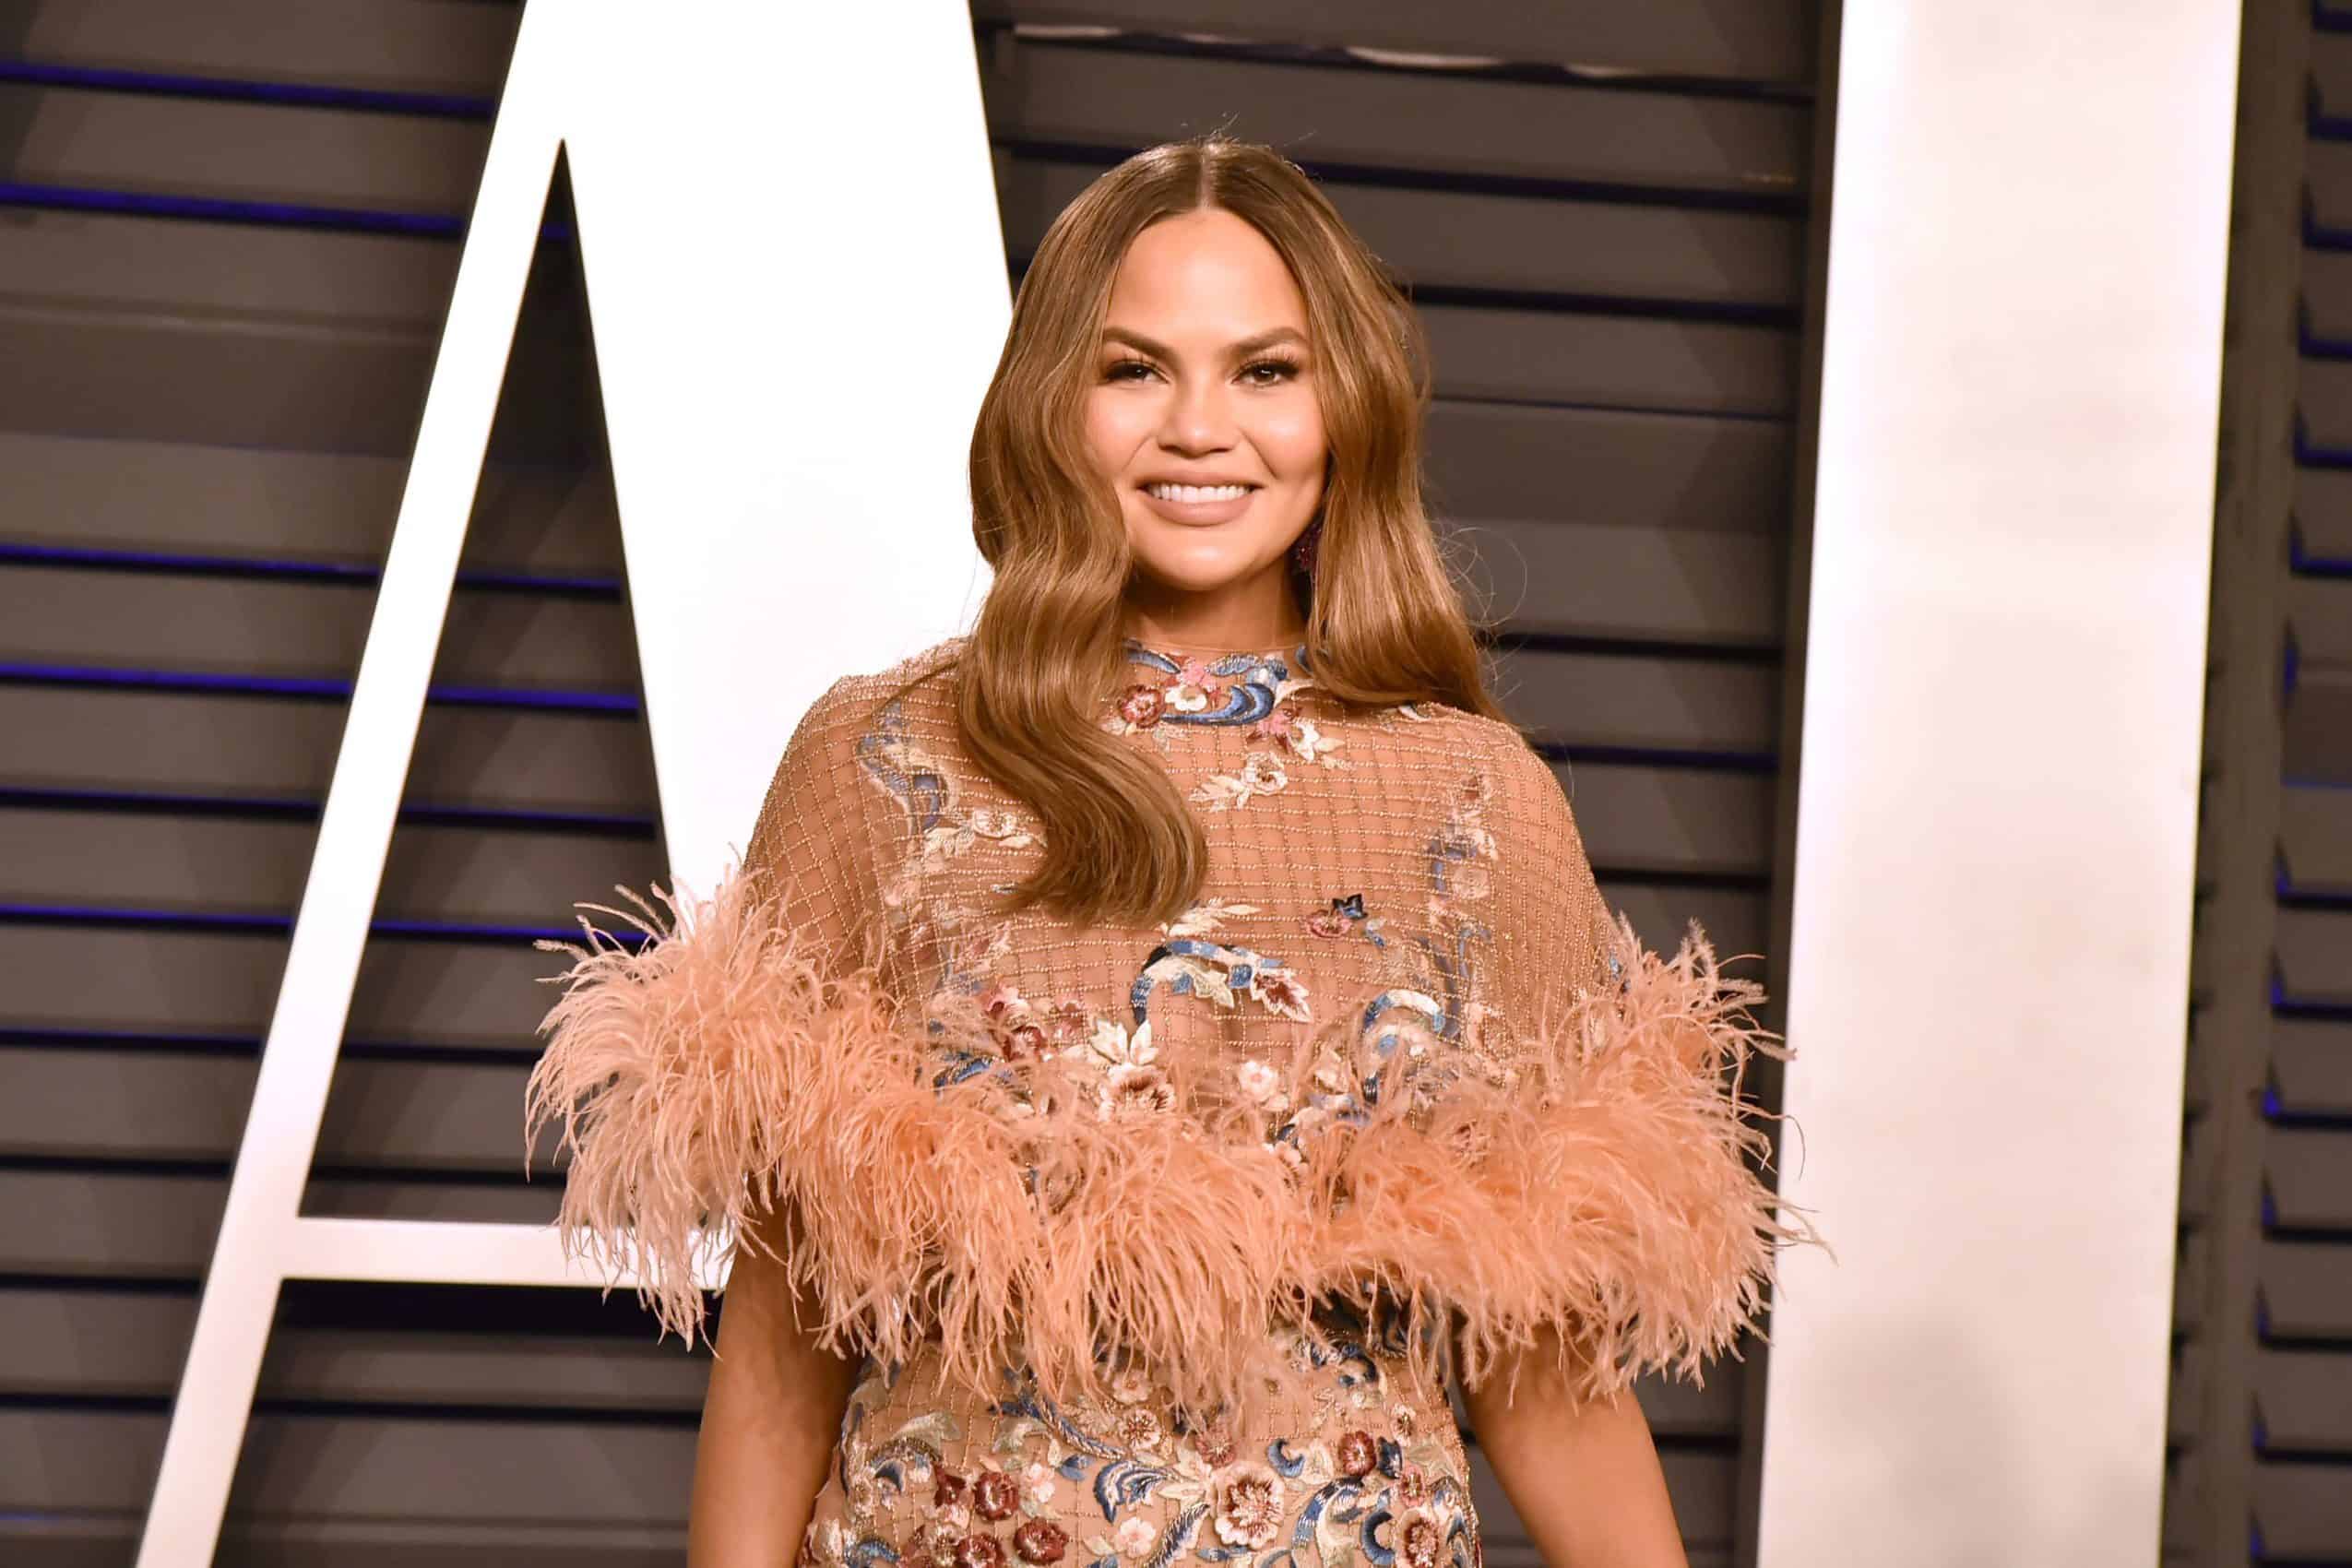 Fans Rally For Chrissy Teigen After Food Writer’s Harsh Critique